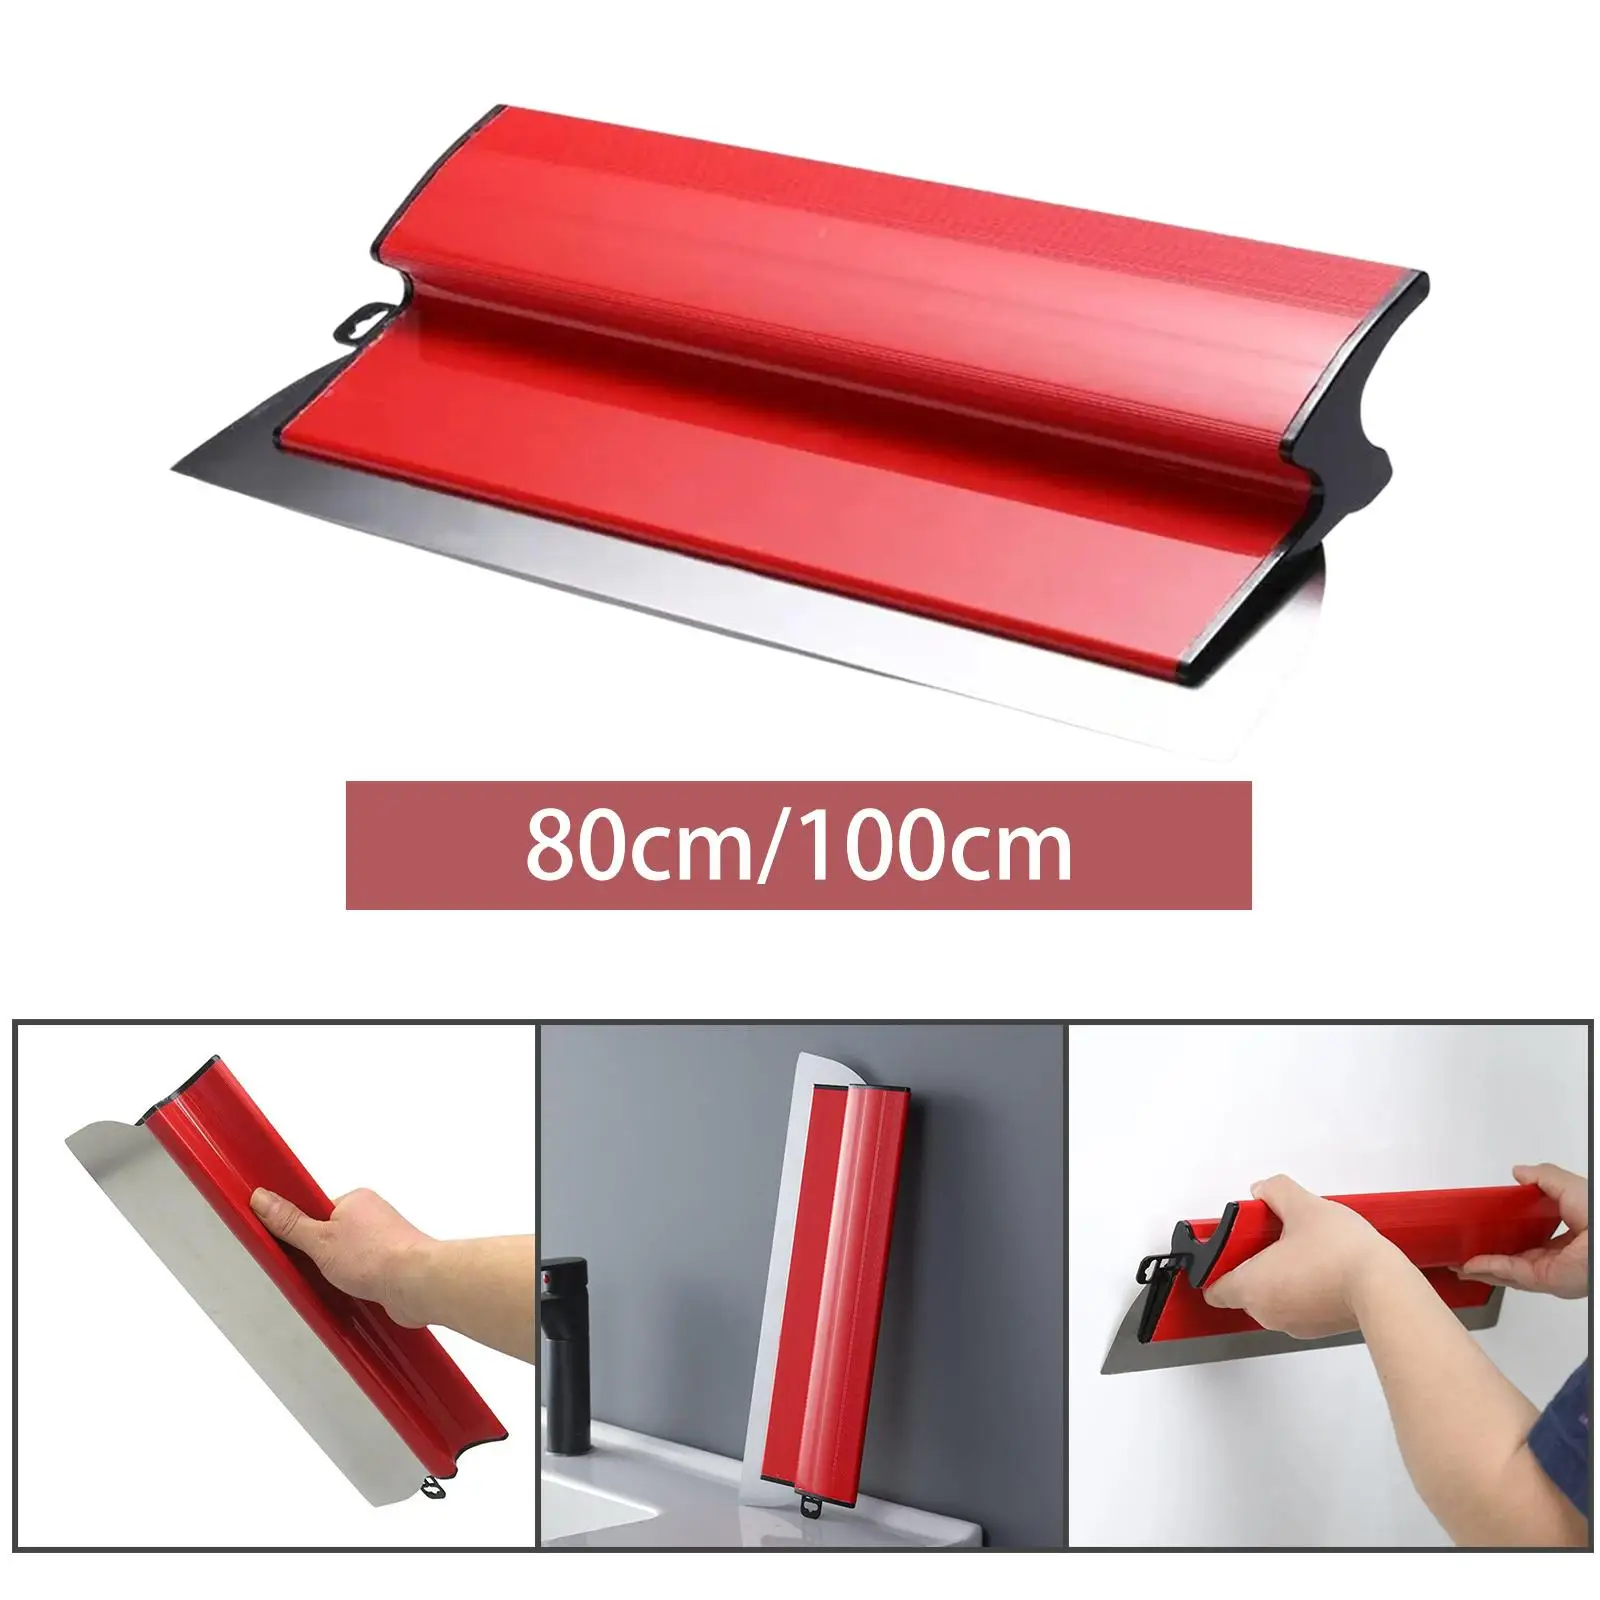 Wall Paint Shovel Multi Use Construction Tools Repairing Drywall Removing Wallpaper Plaster Cement Putty Scraper